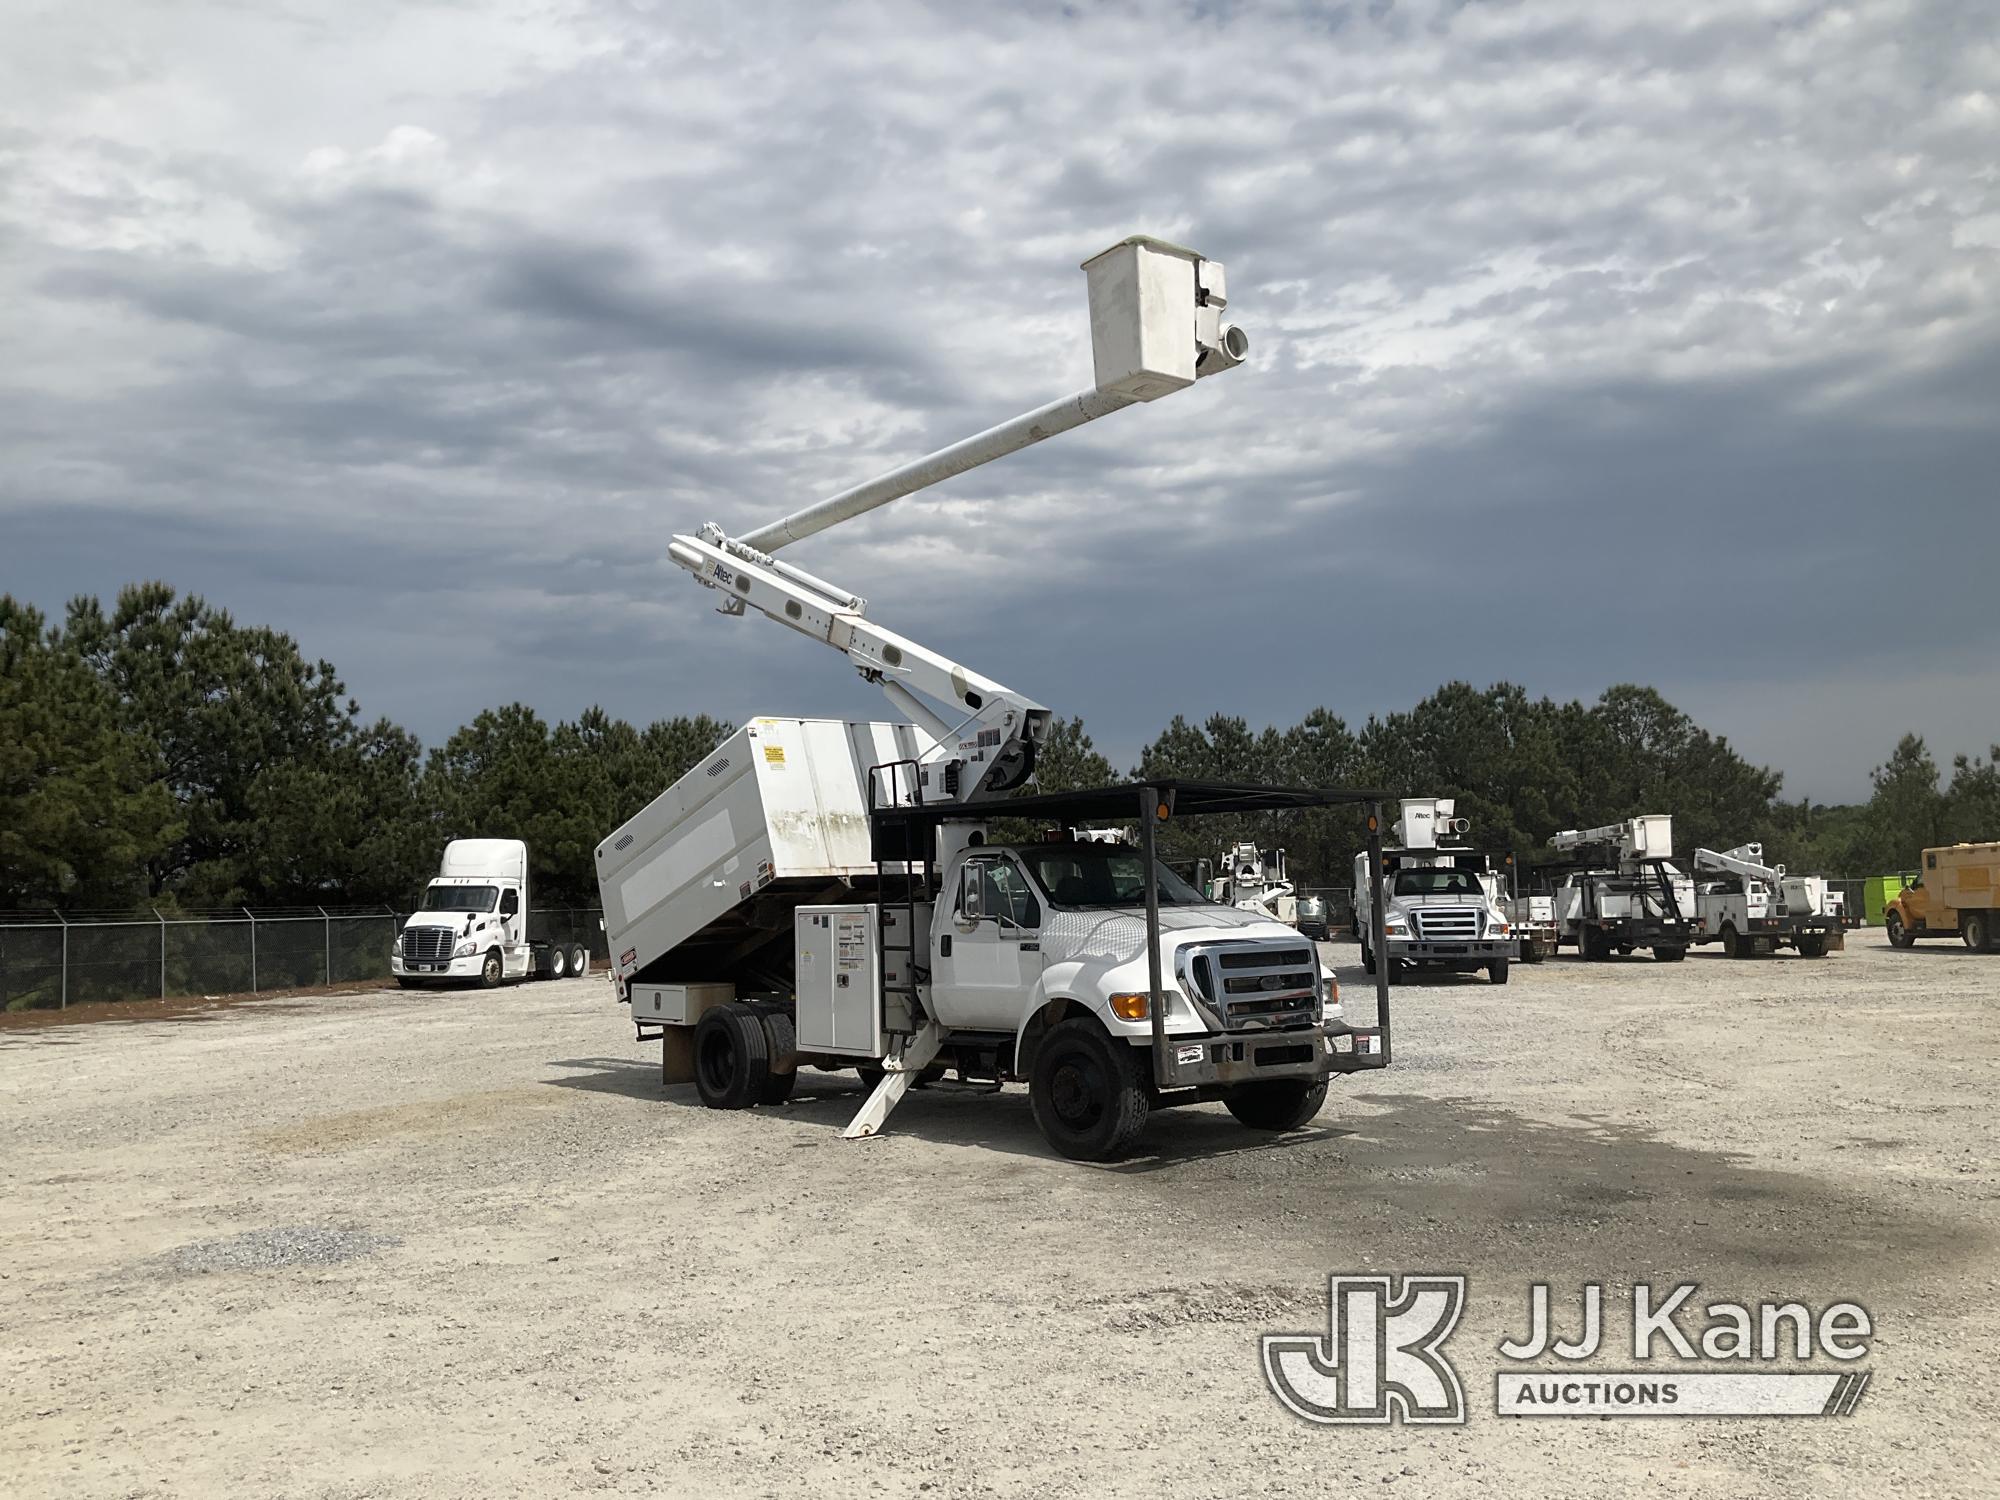 (Villa Rica, GA) Altec LR756, Over-Center Bucket Truck mounted behind cab on 2015 Ford F750 Chipper